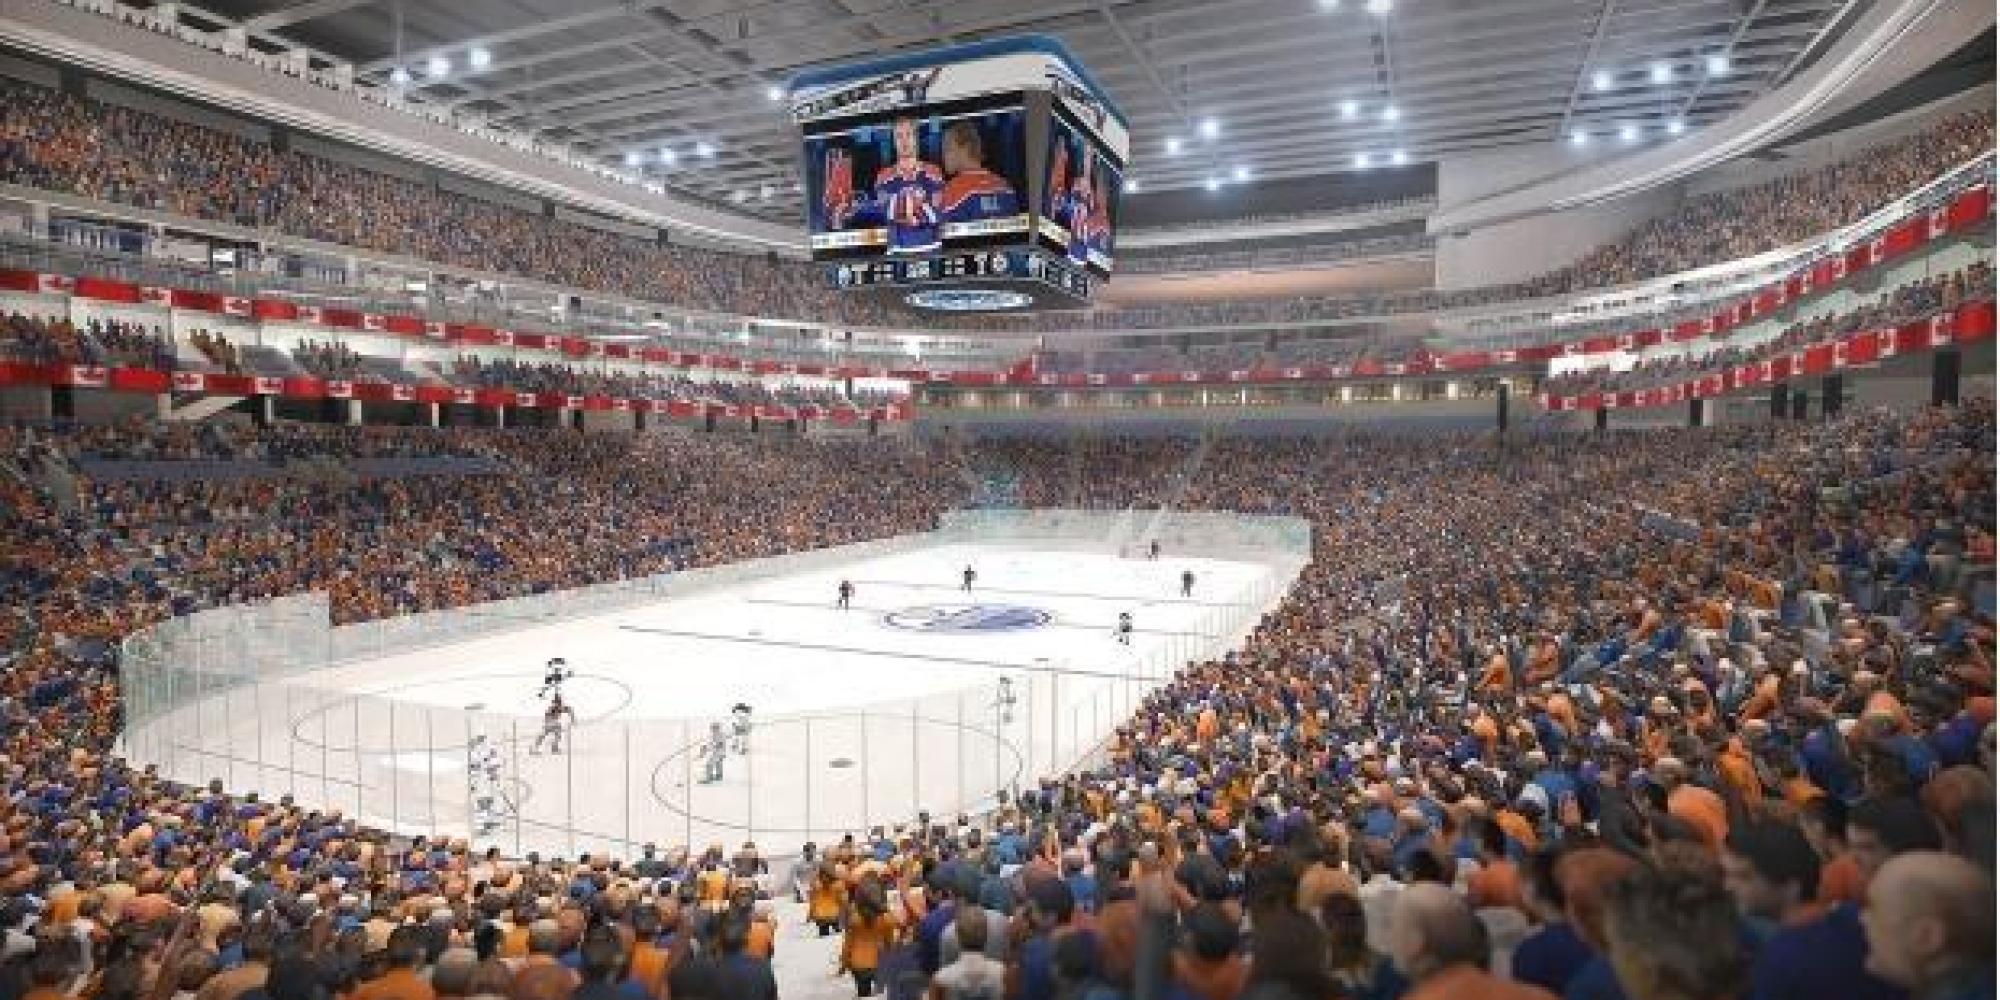 Photos Of New Edmonton Arena Provide Glimpse Of Completed Rogers Place